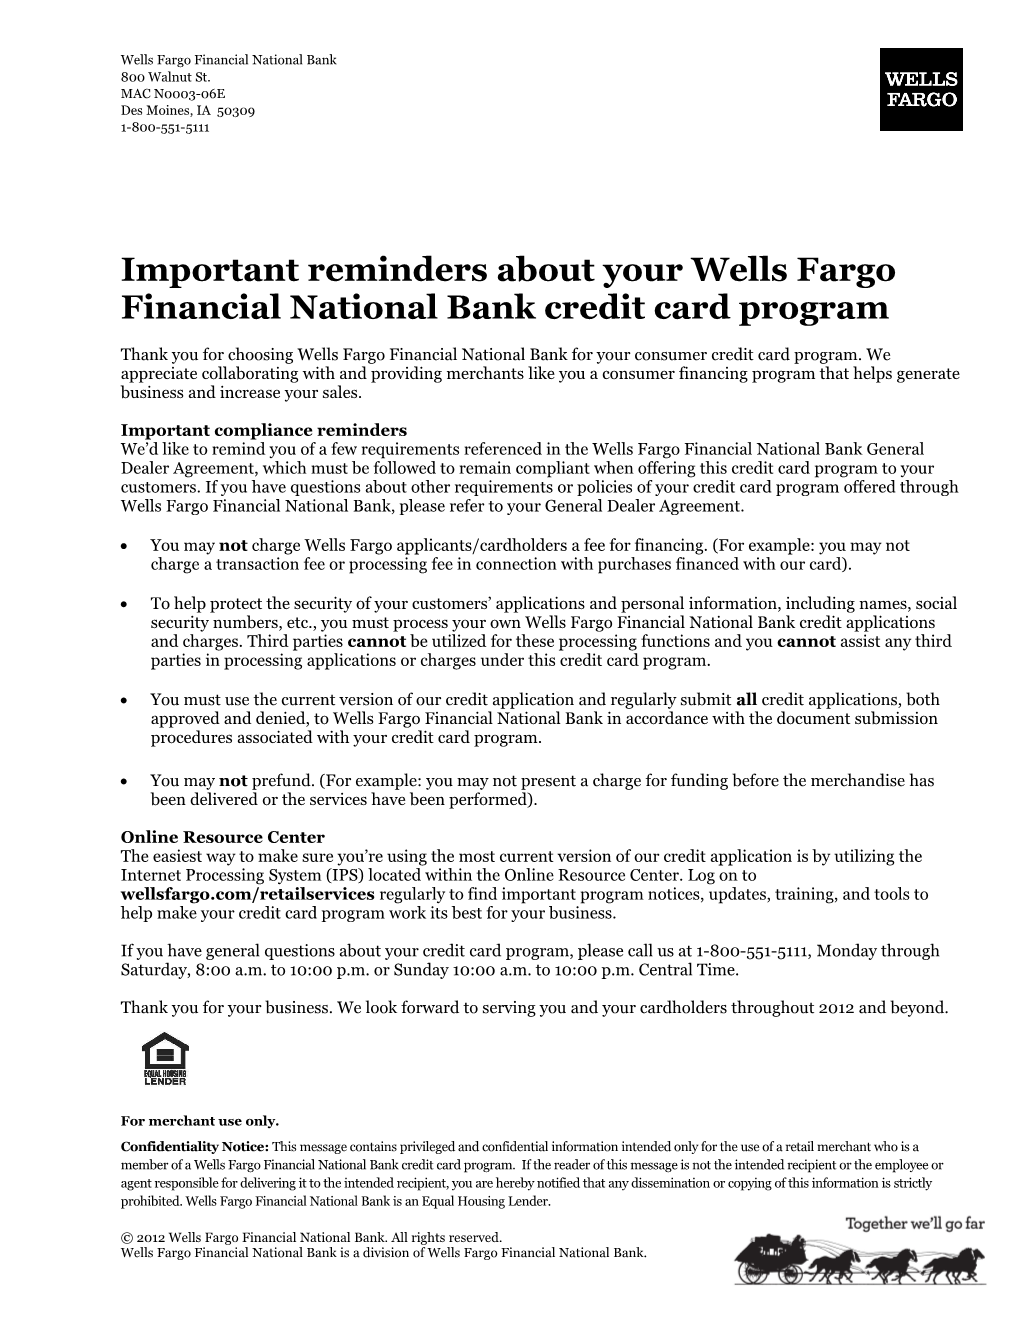 Important Reminders About Your Wells Fargo Financial National Bank Credit Card Program